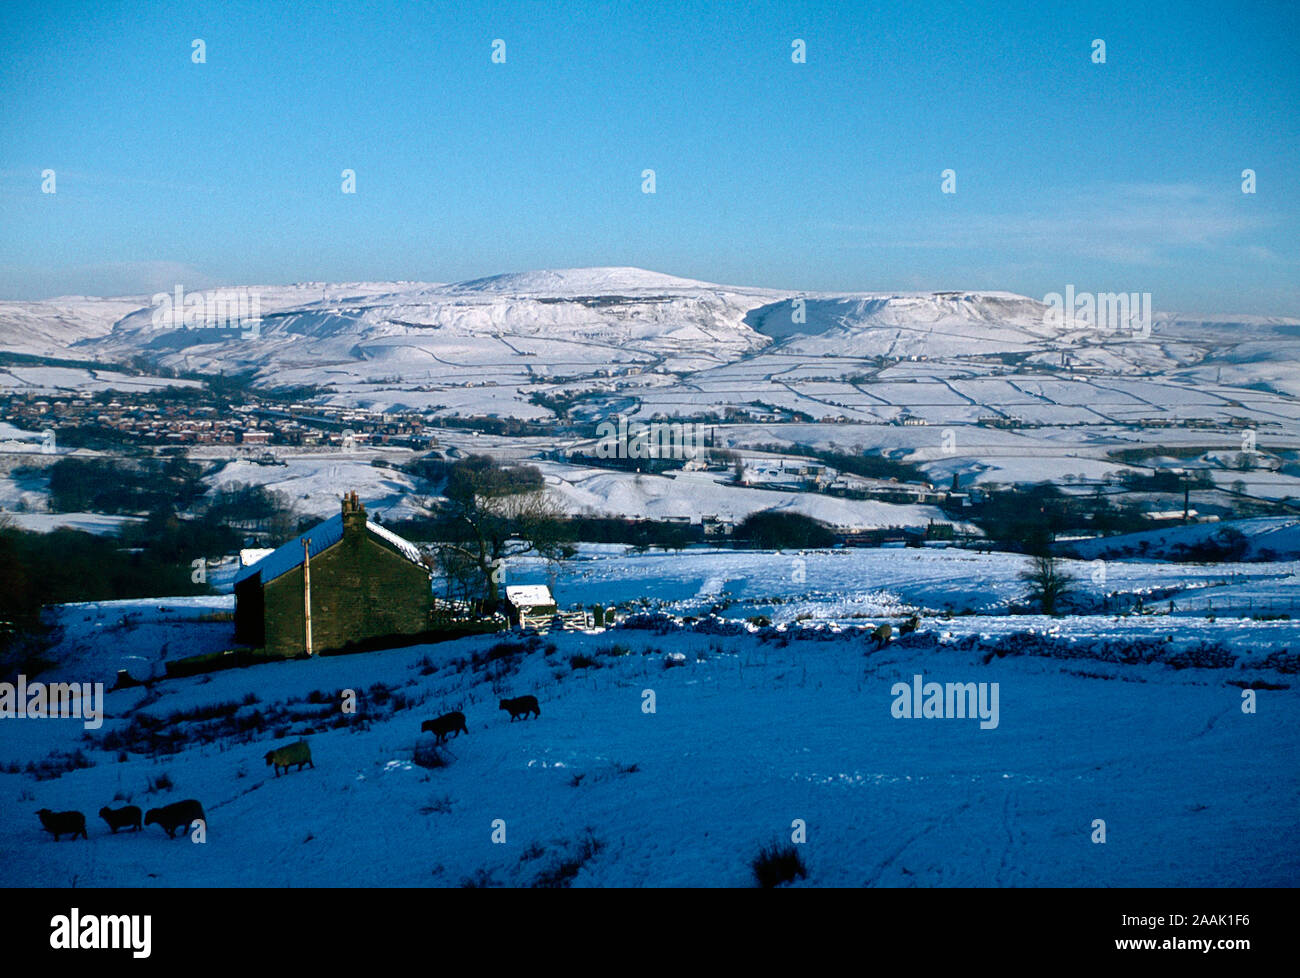 The snow covered Rossendale valley in the winter of 1980 looking towards the central Lancashire village of Helmshore and the hills of Scout Moor Stock Photo